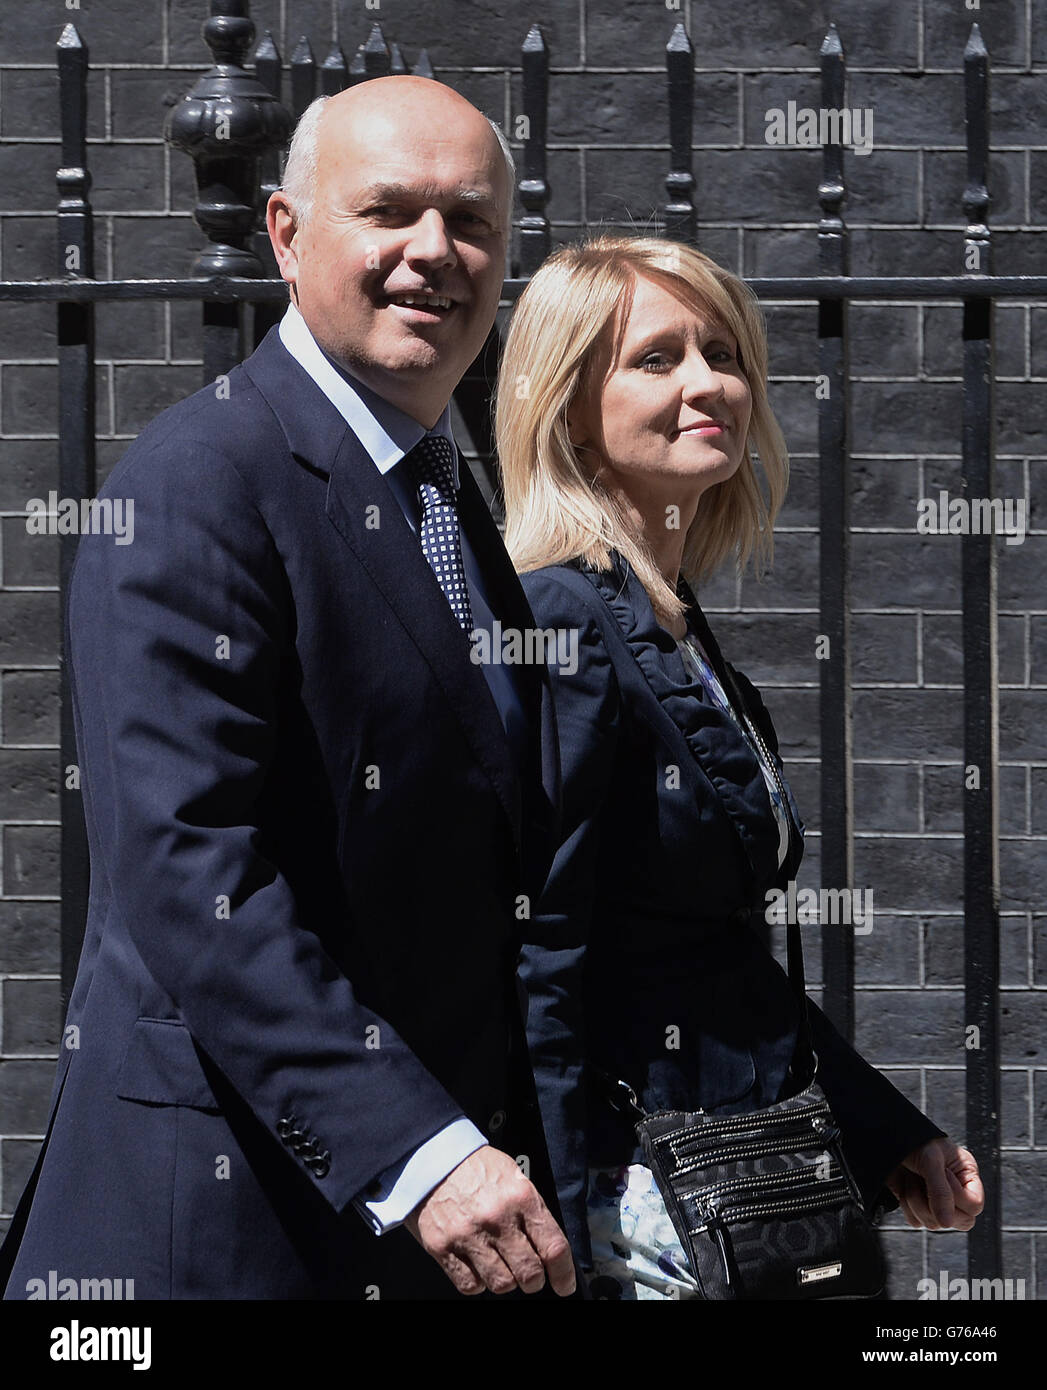 Secretary of State for Work and Pensions, Iain Duncan Smith and Employment Minister Esther McVey arrive at 10 Downing Street in London as David Cameron is putting the final touches to a reshuffle that is expected to see more women promoted into key positions. Stock Photo